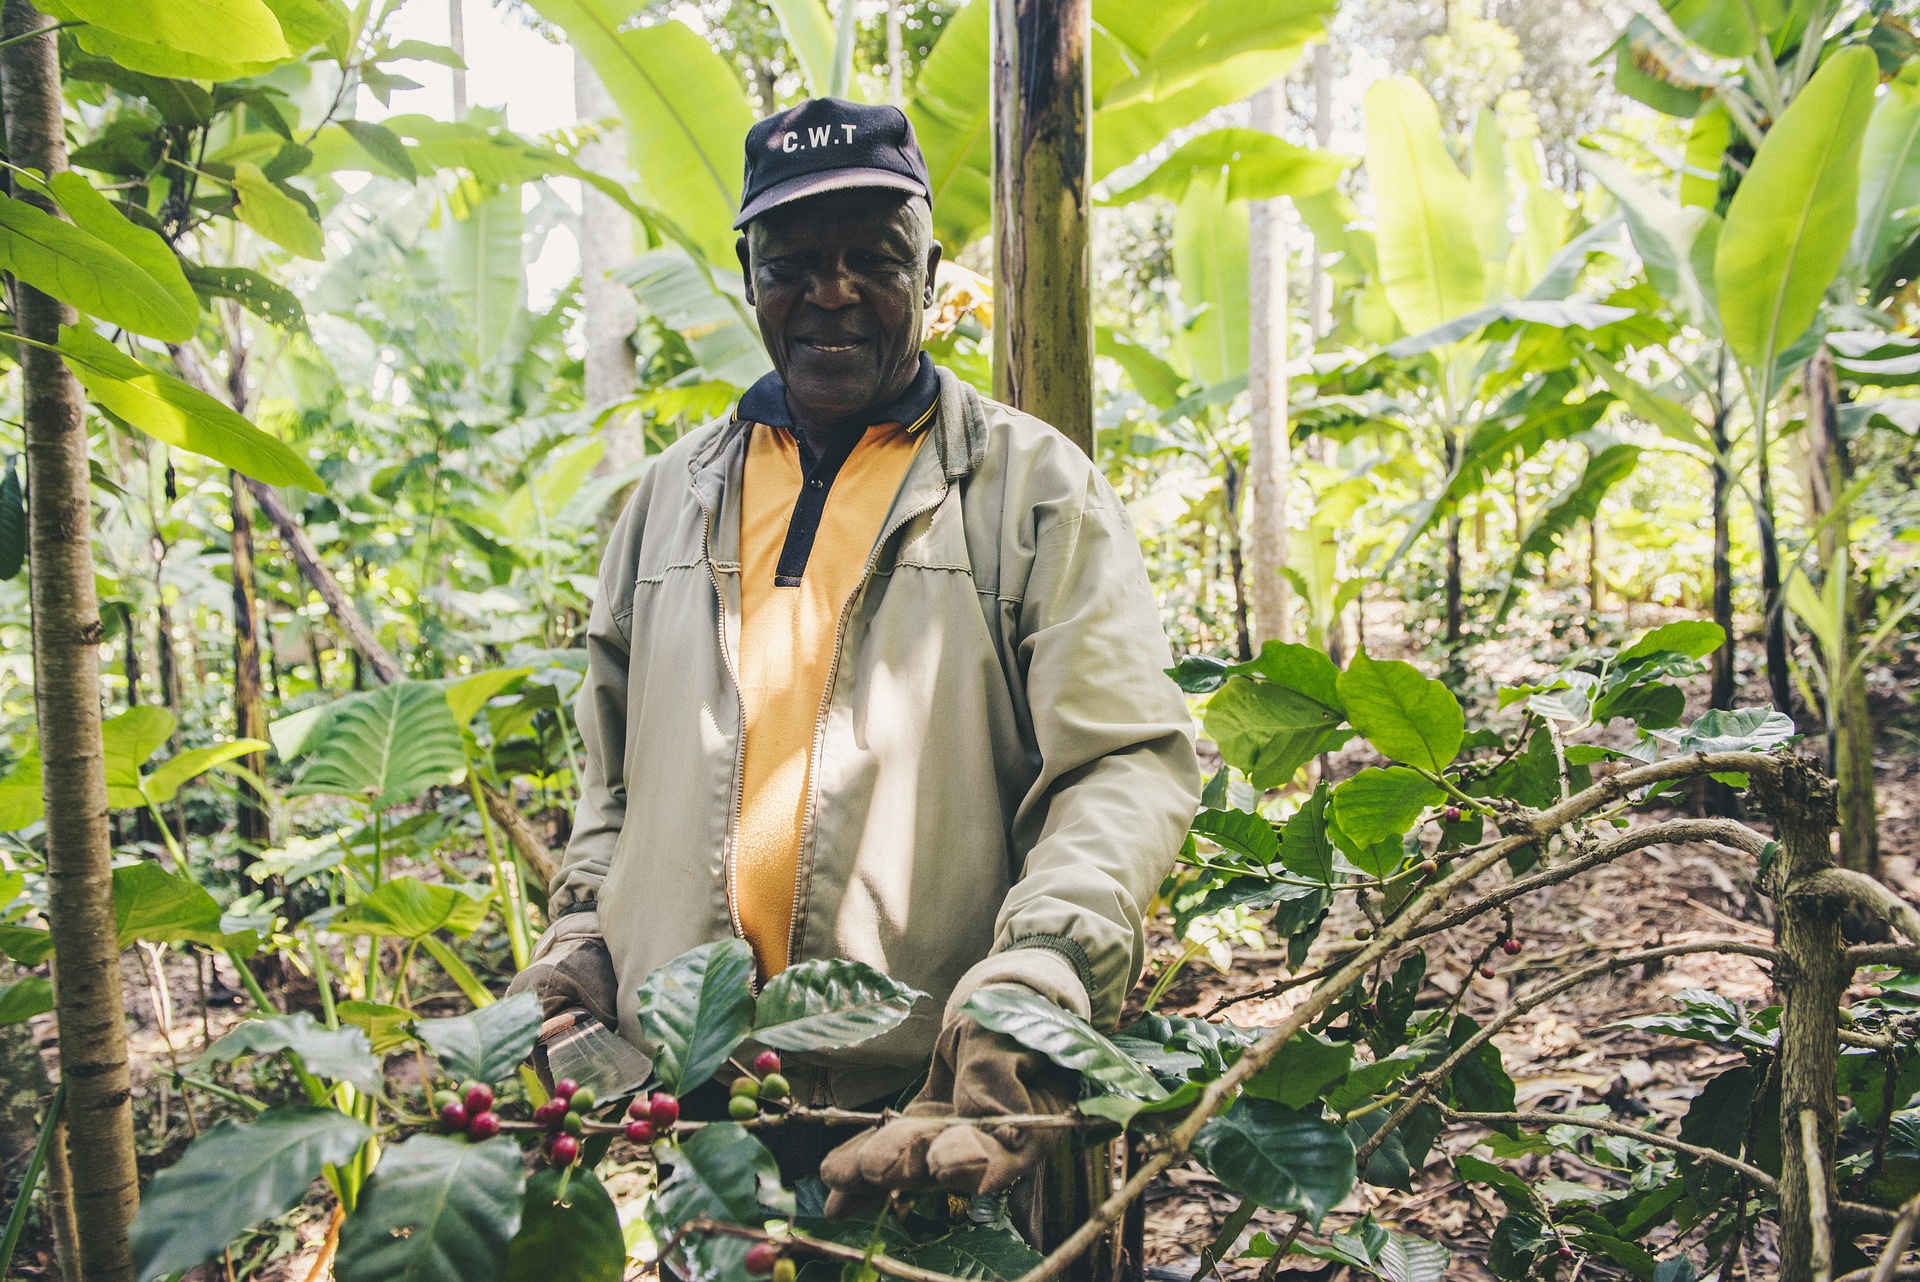 Smallholder farmers and carbon credits